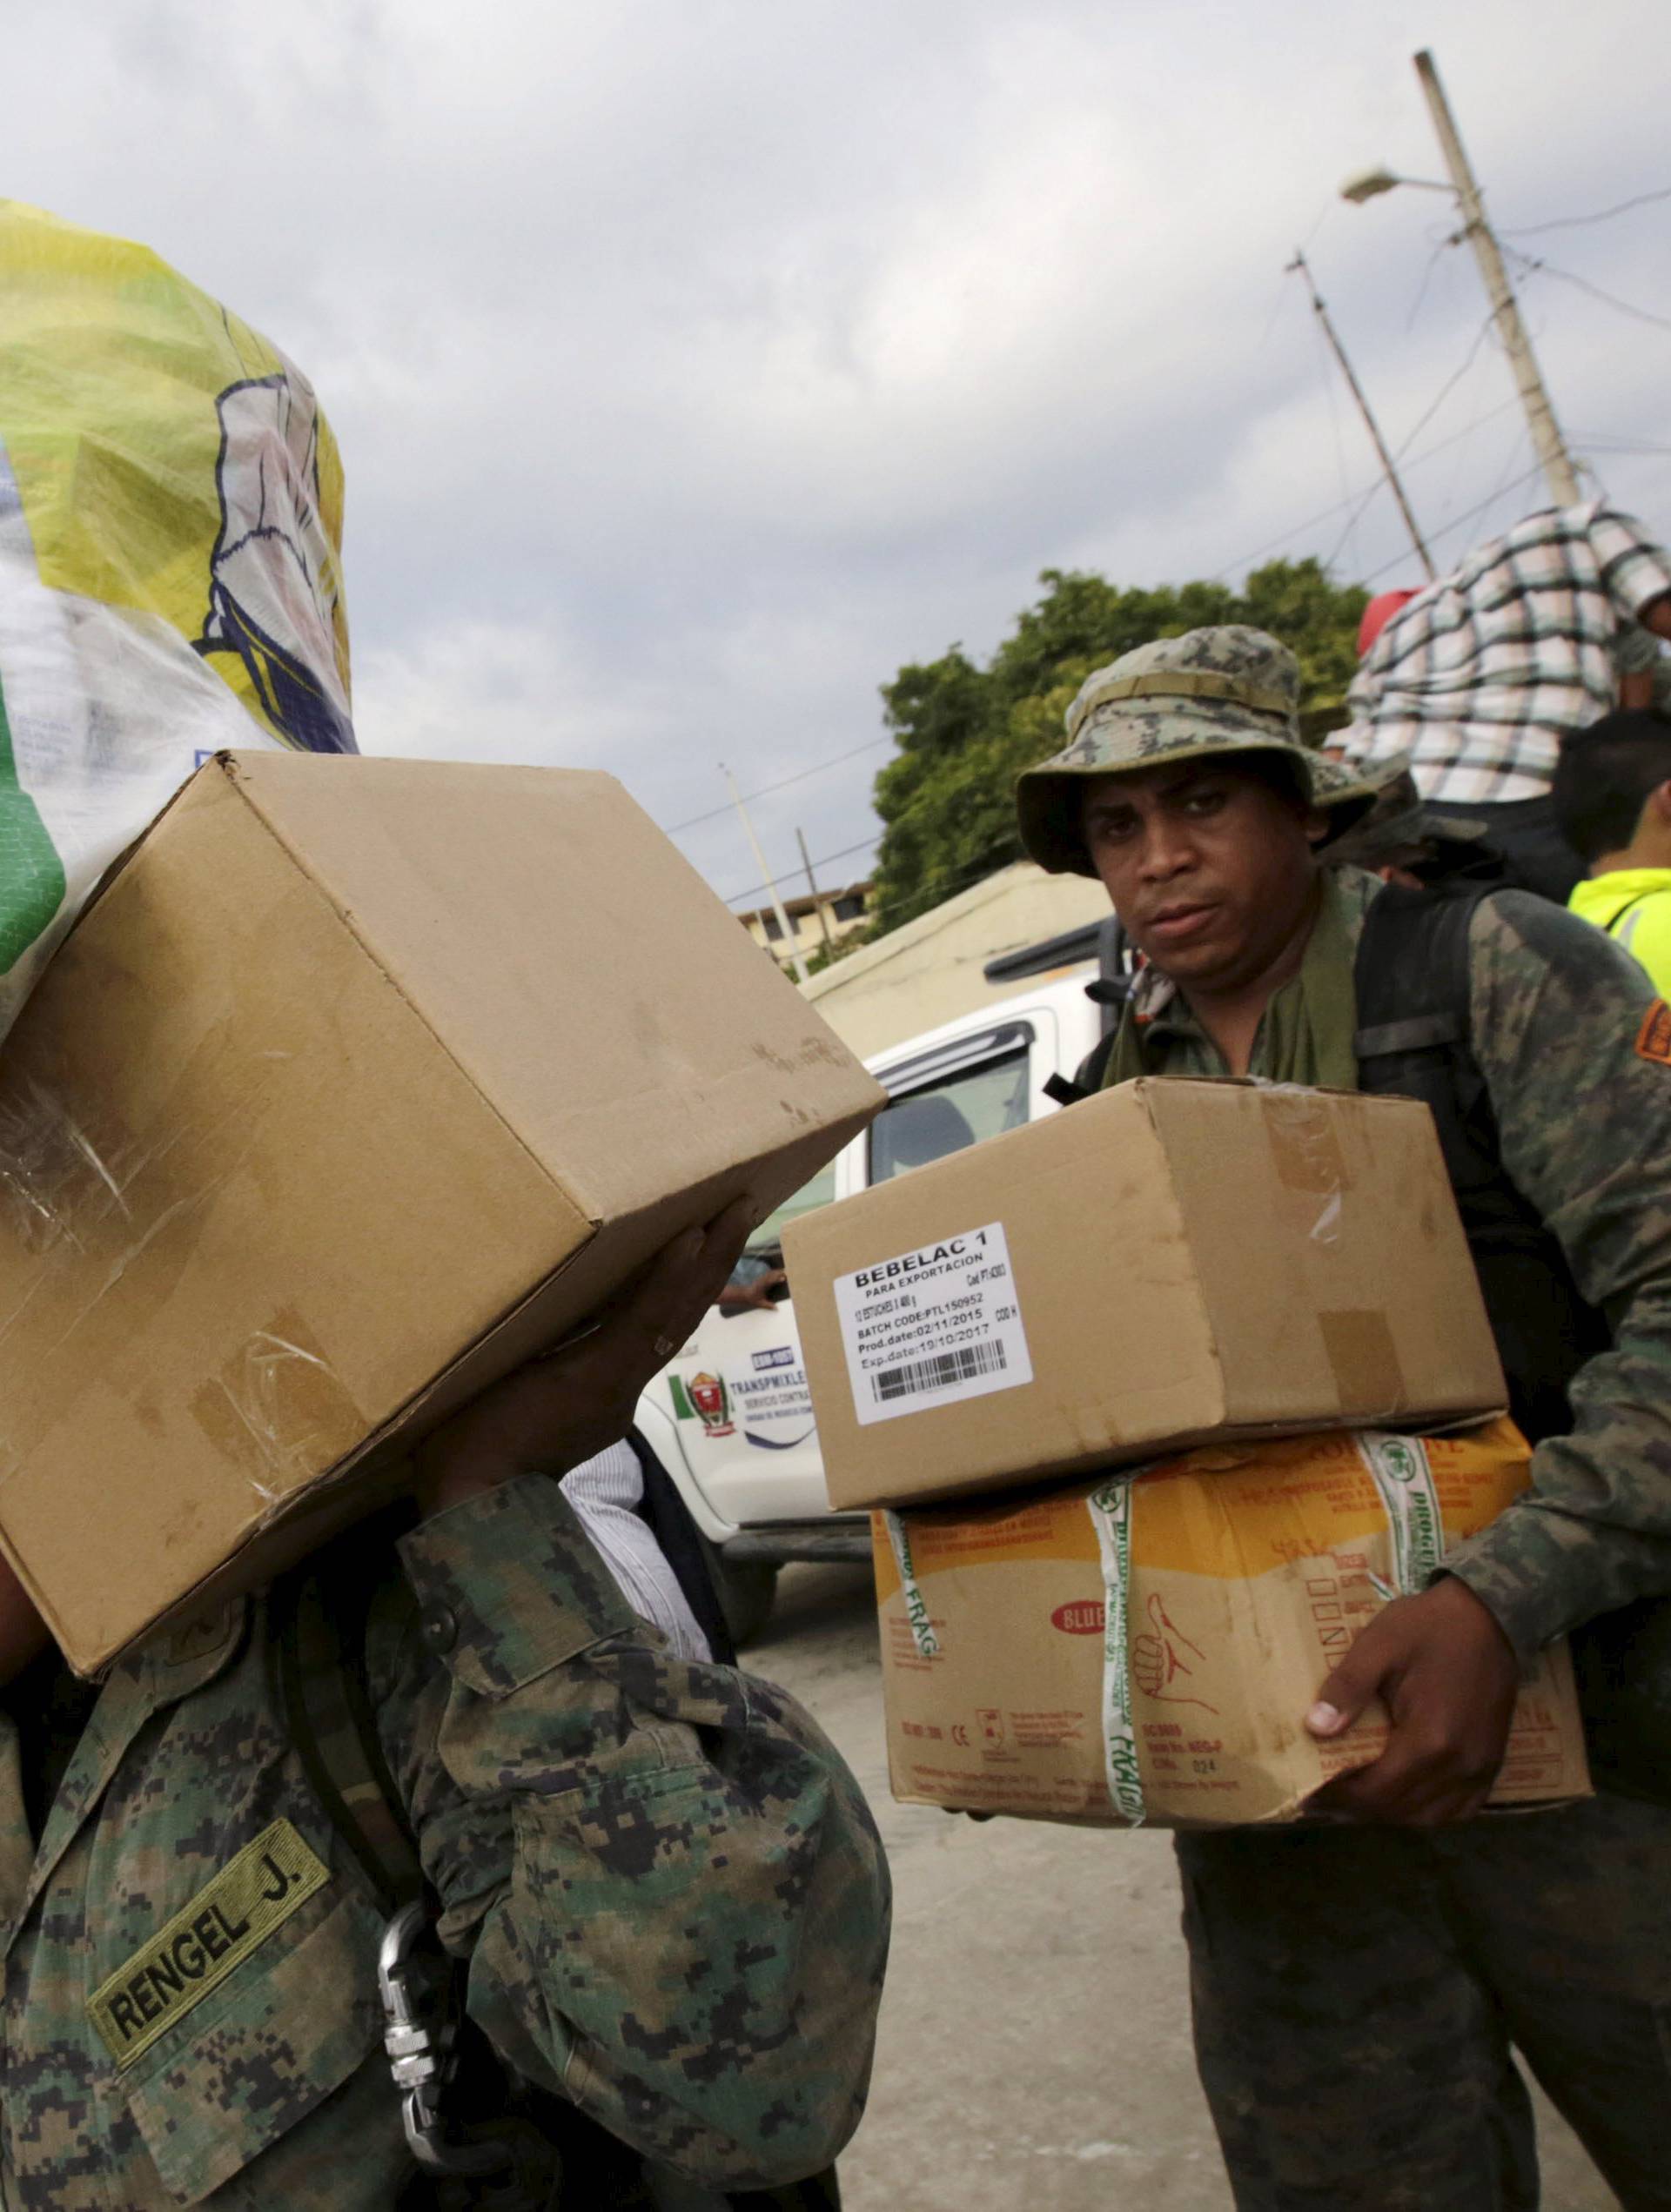 Soldiers load humanitarian aid boxes from a truck after an earthquake struck the town of Canoa